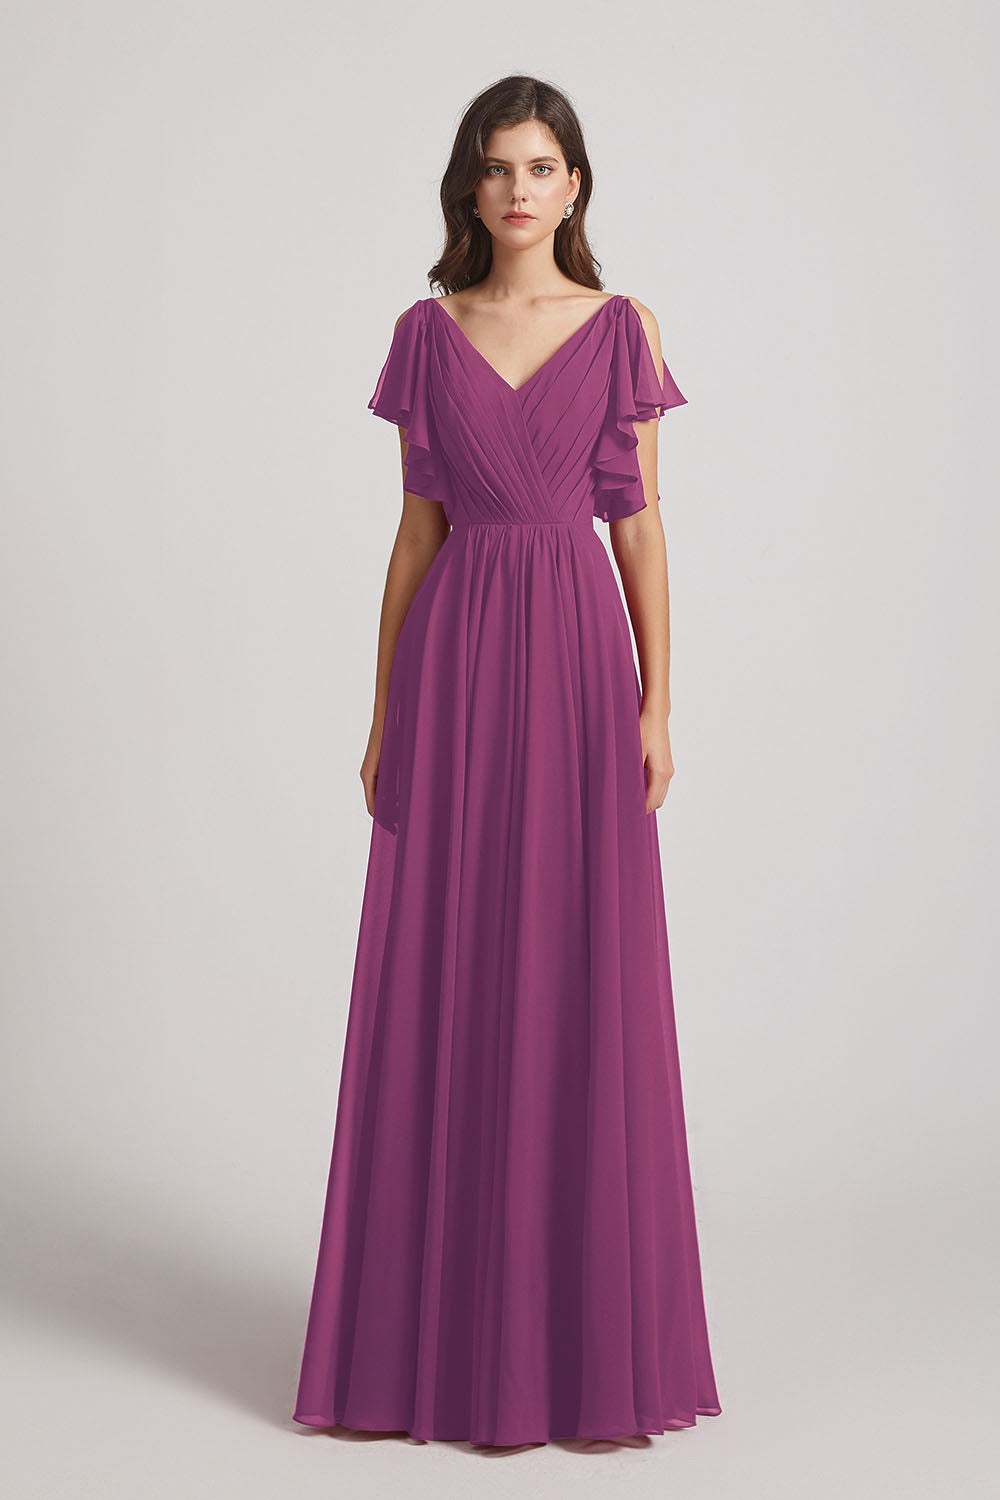 Alfa Bridal Wild Berry V-Neck Pleated Chiffon Bridesmaid Dresses with Open Flutter Sleeves (AF0098)